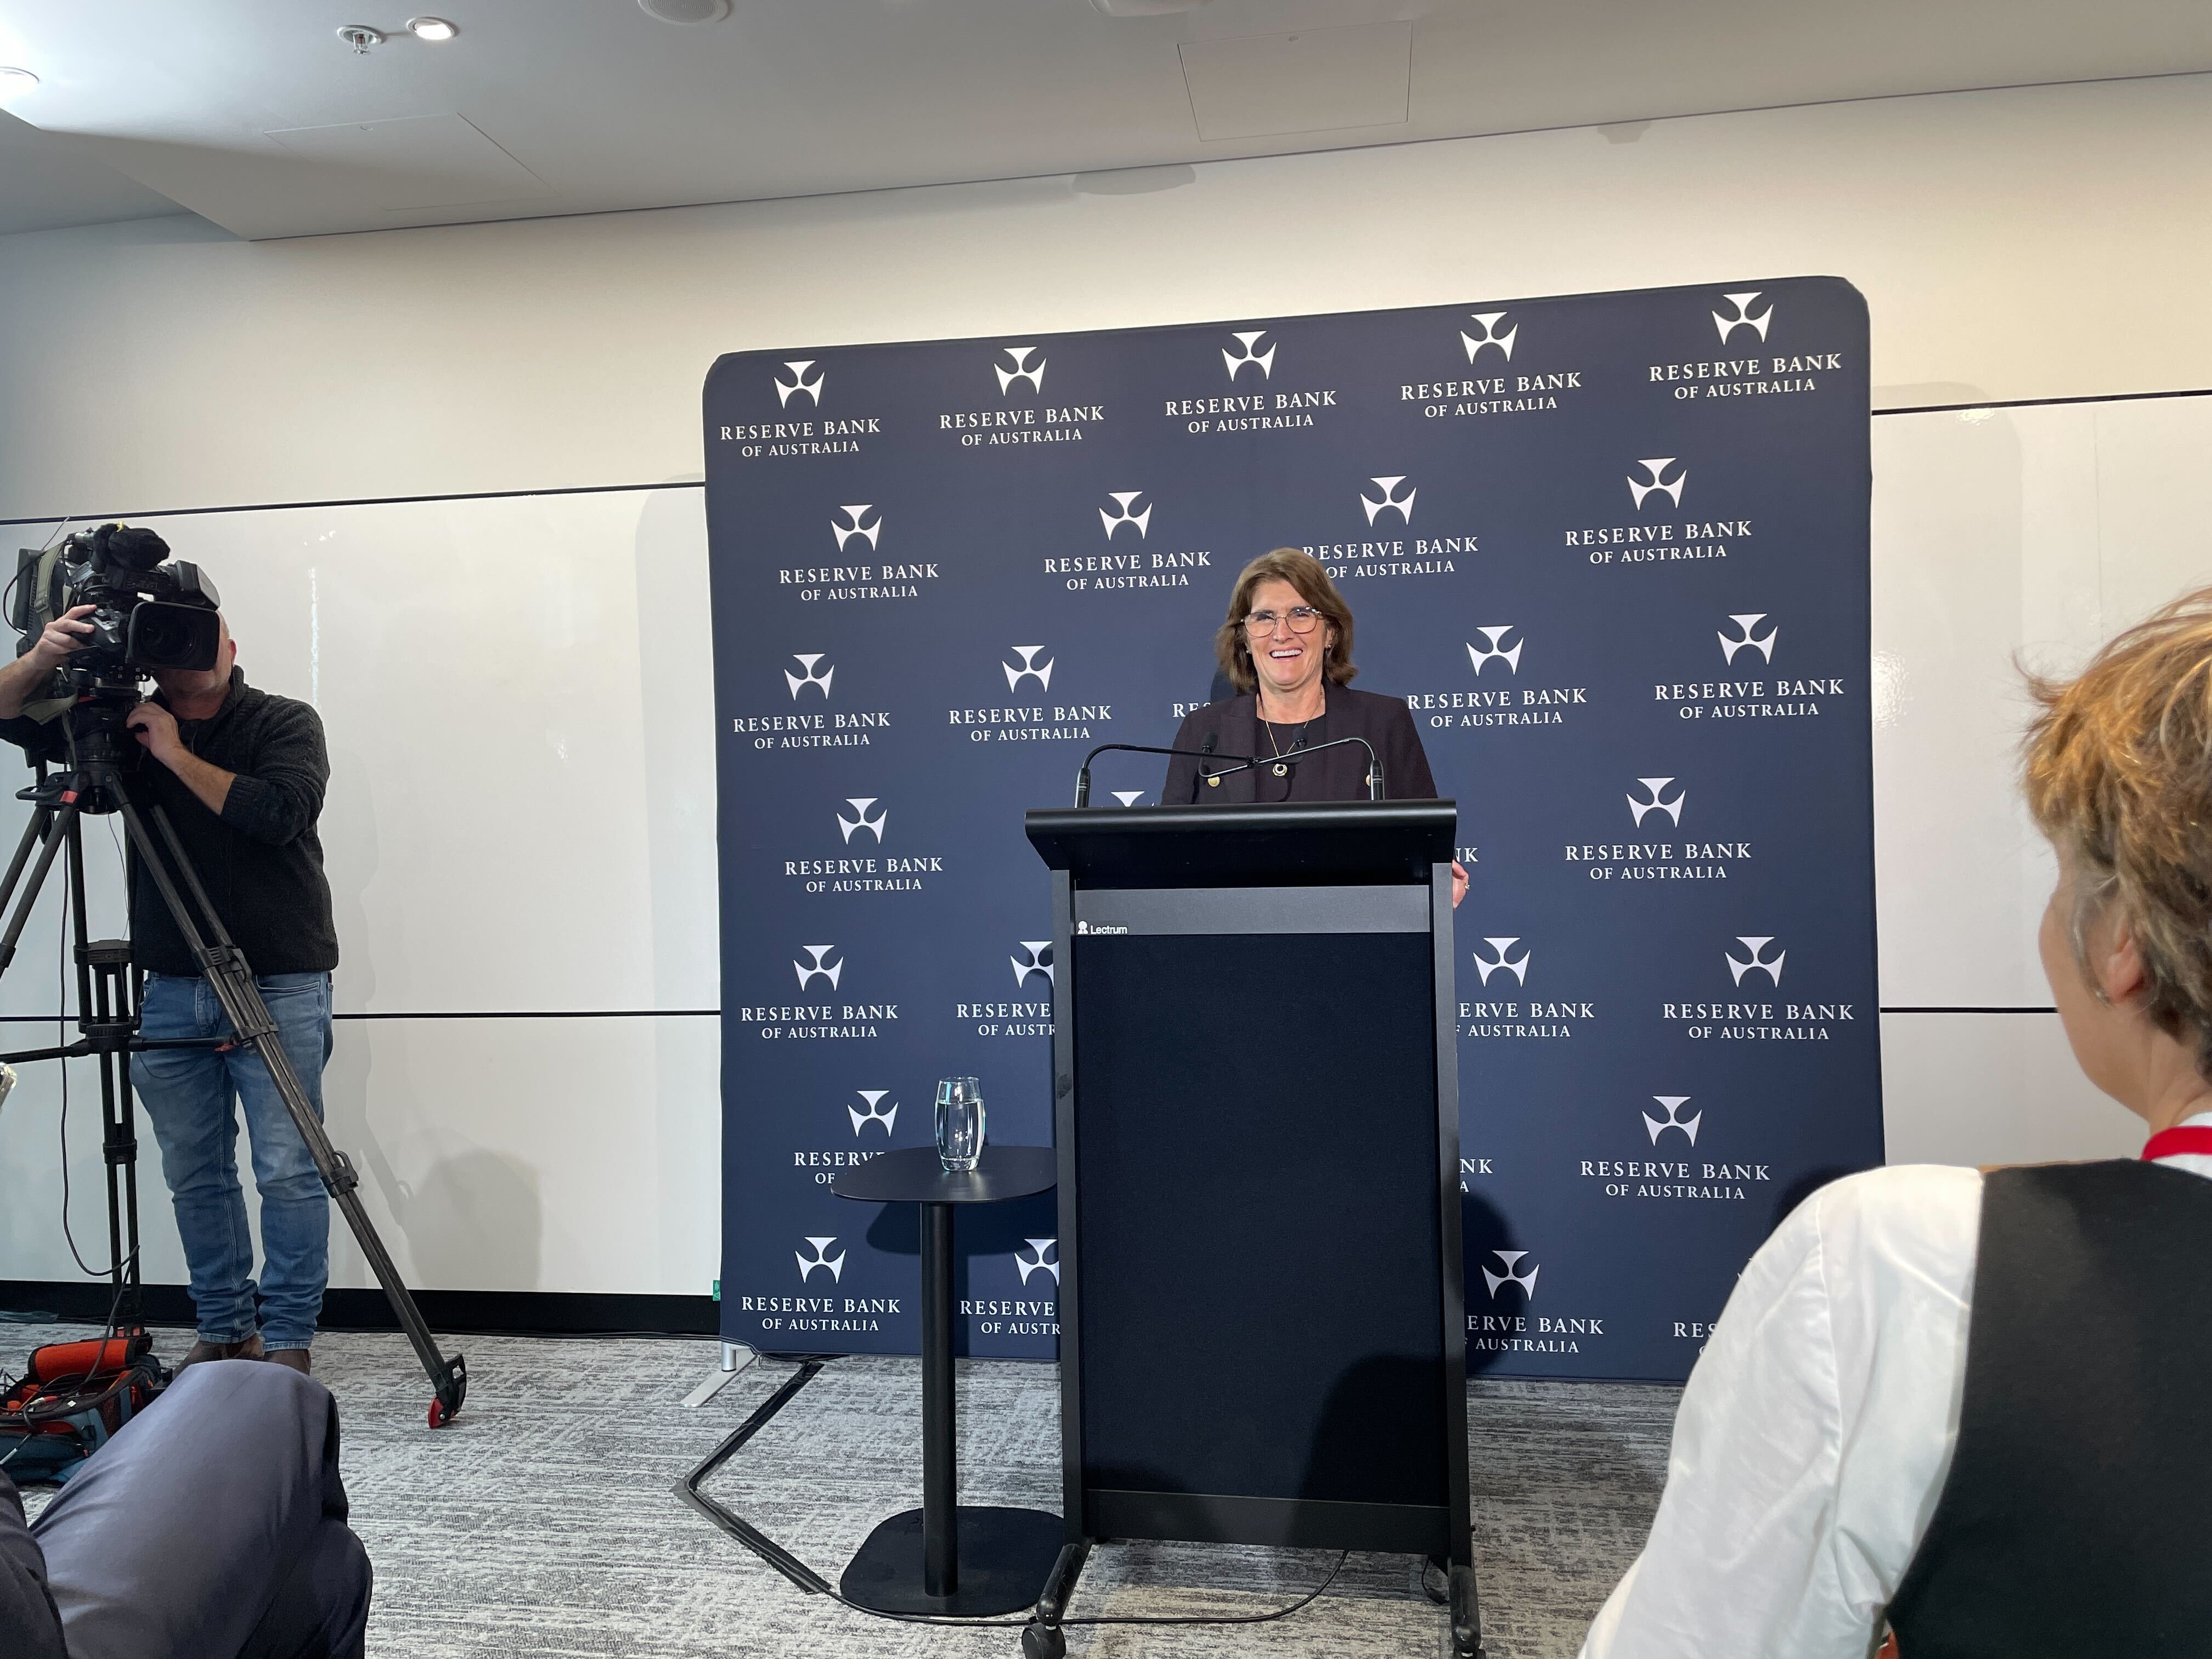 Reserve Bank of Australia Governor Michele Bullock speaking to the media at today's press conference. (Source: Sara Allen, Livewire Markets)